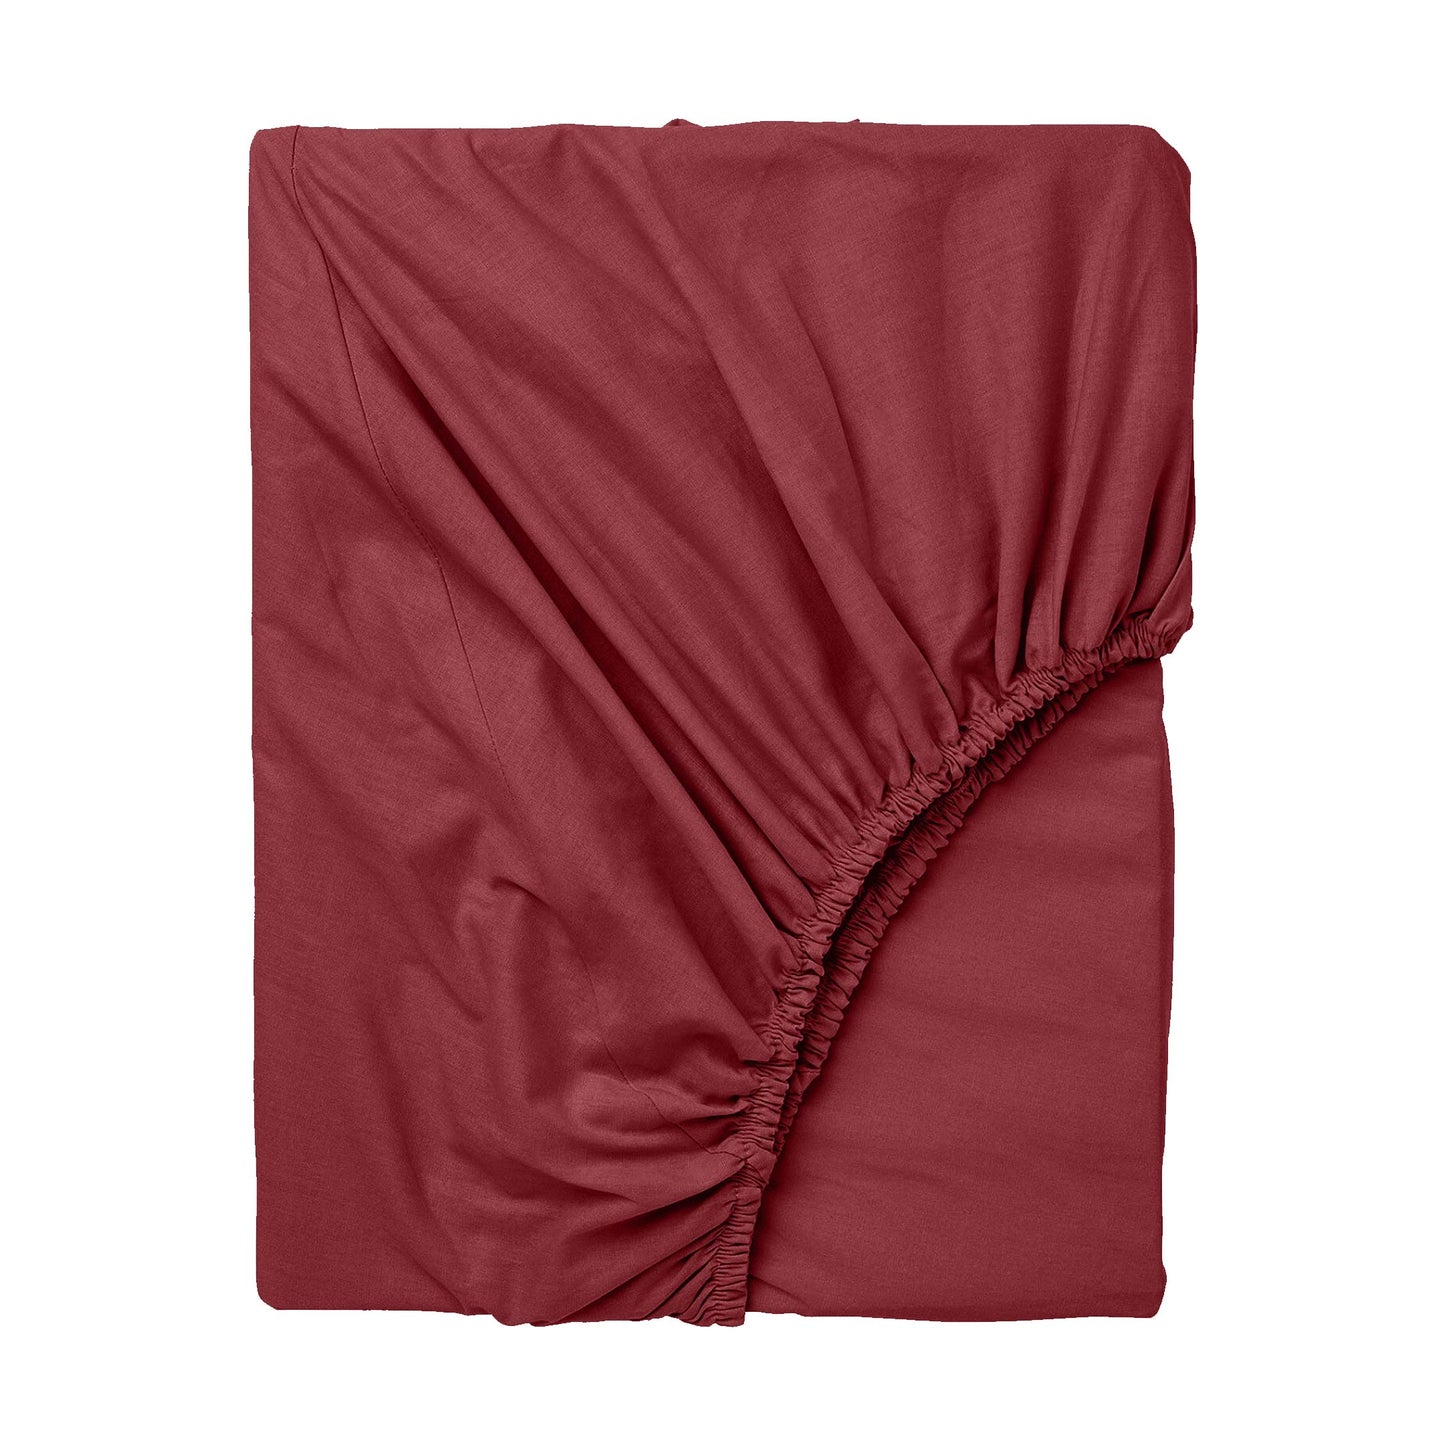 Maroon - Fitted sheet - King size(3-pcs)